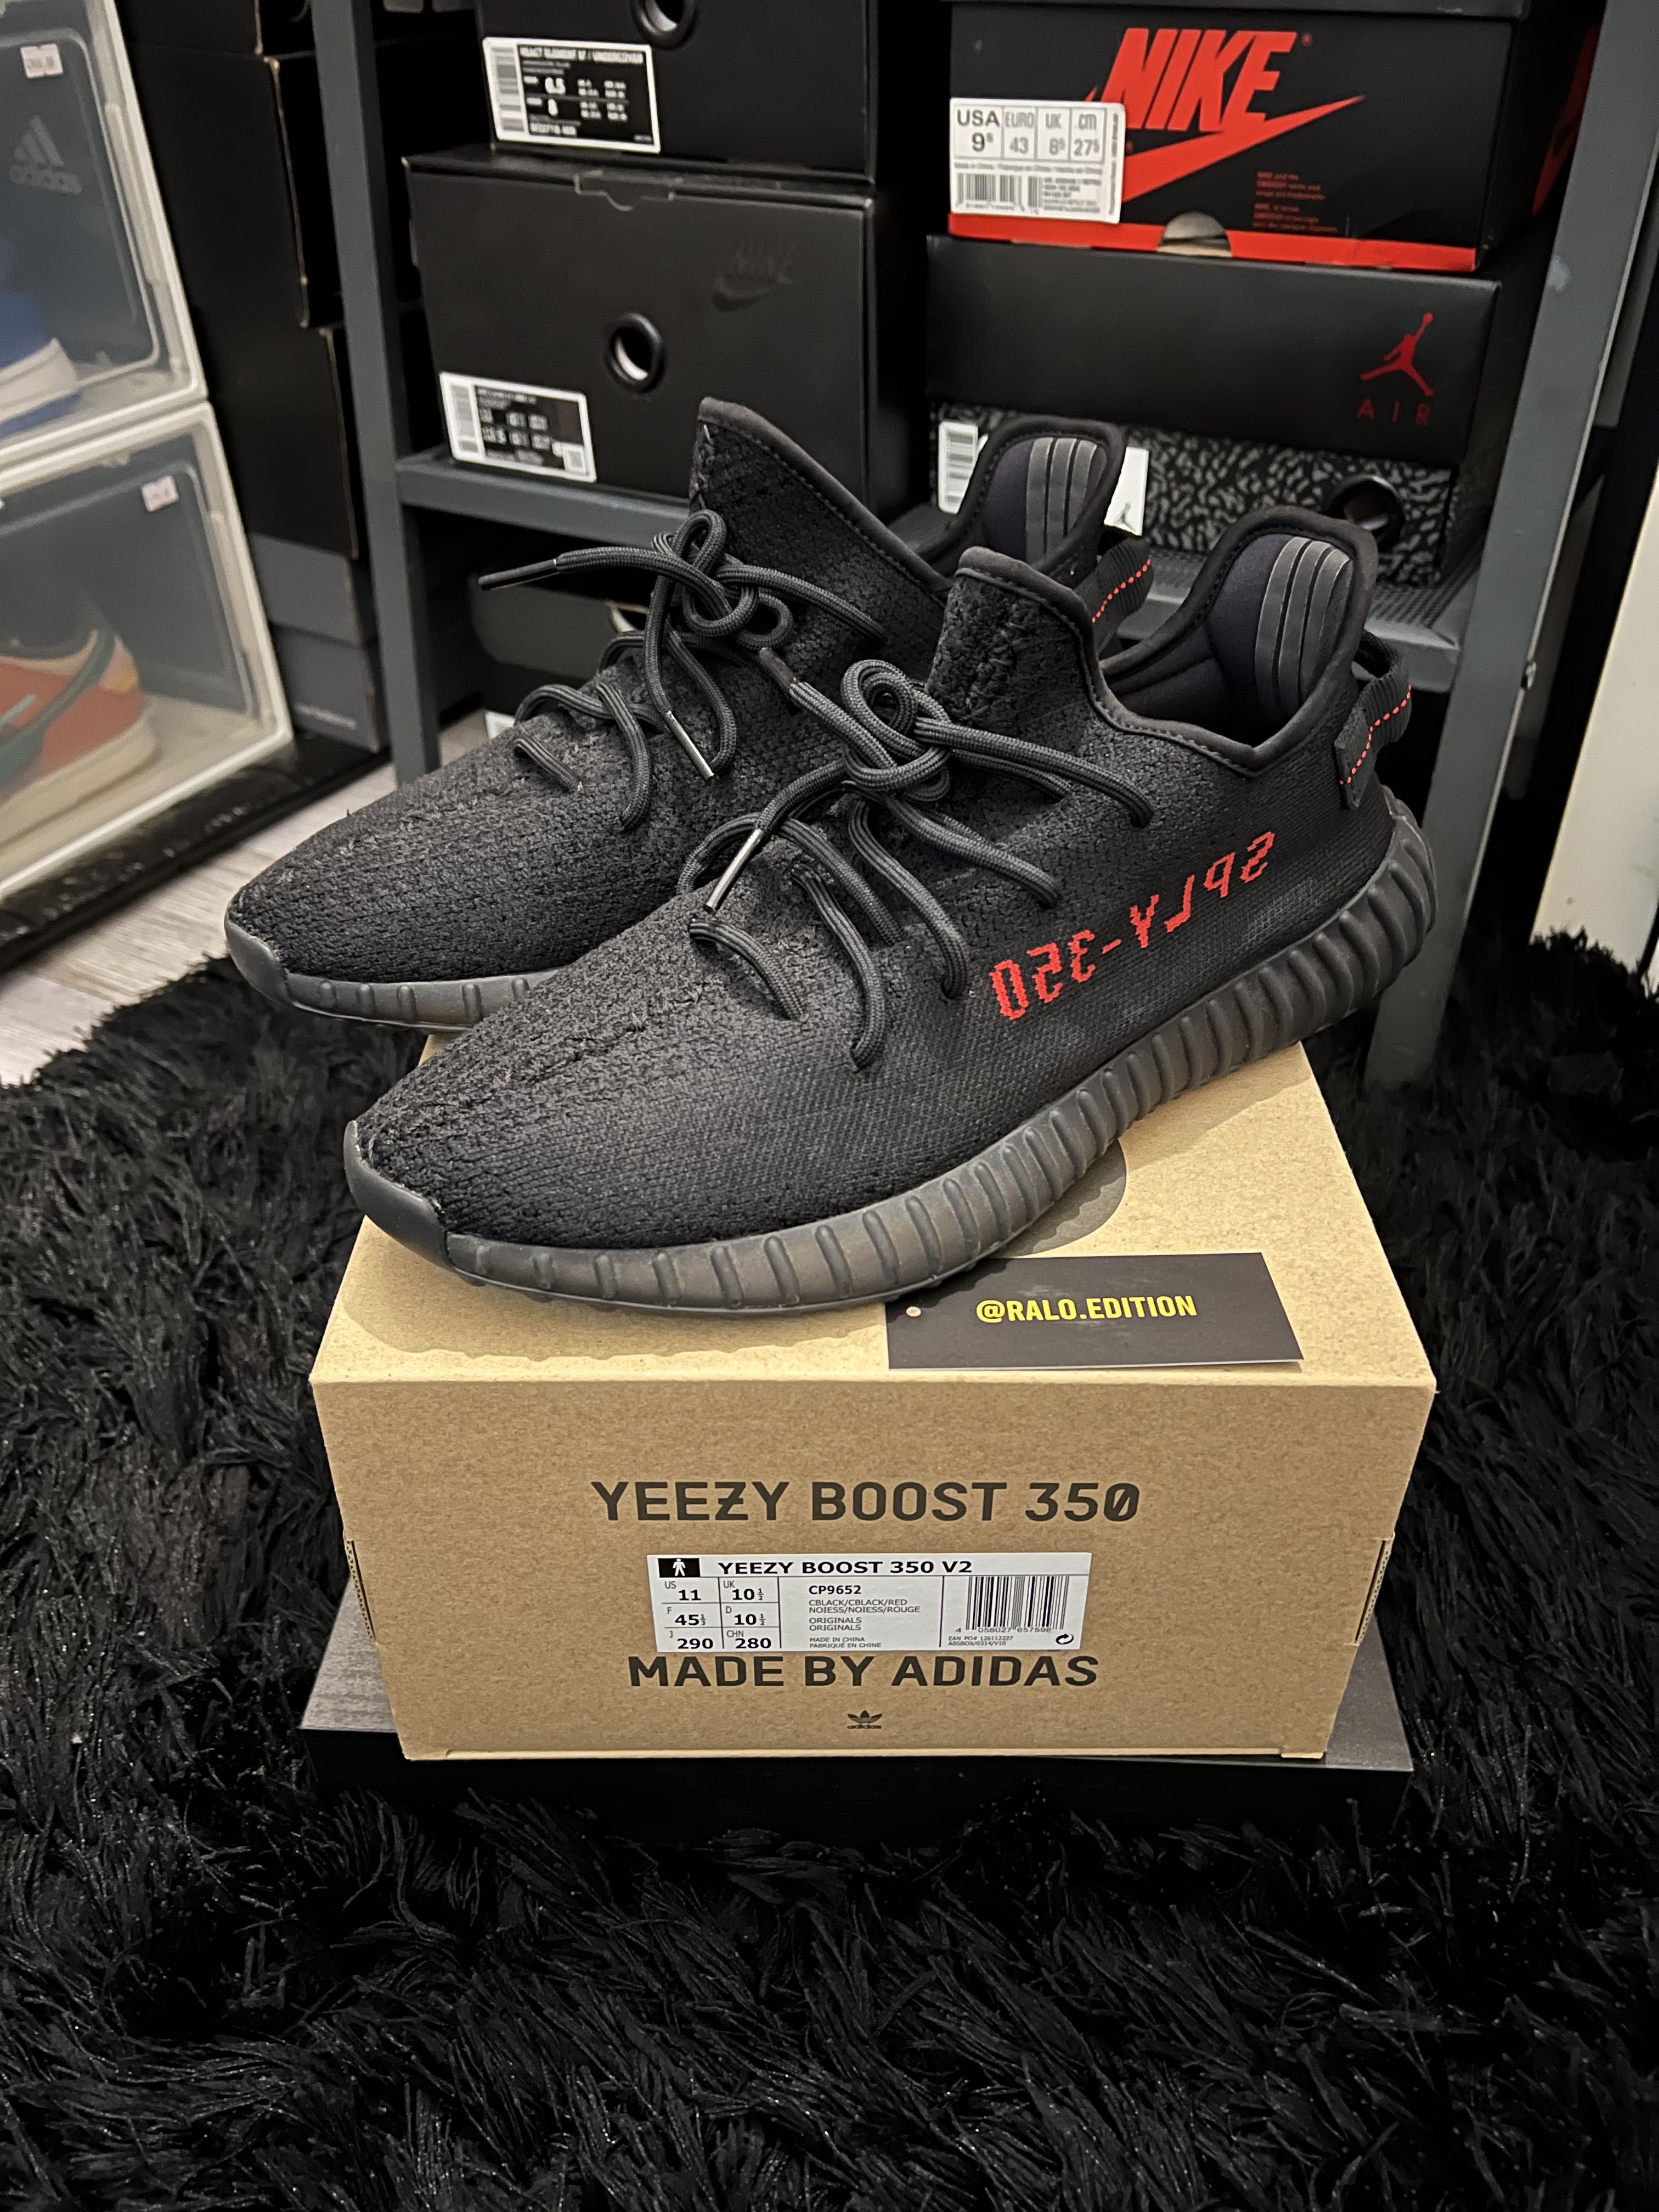 YEEZY BOOST 350 V2 'BRED', Men's Fashion, Footwear, Sneakers Carousell